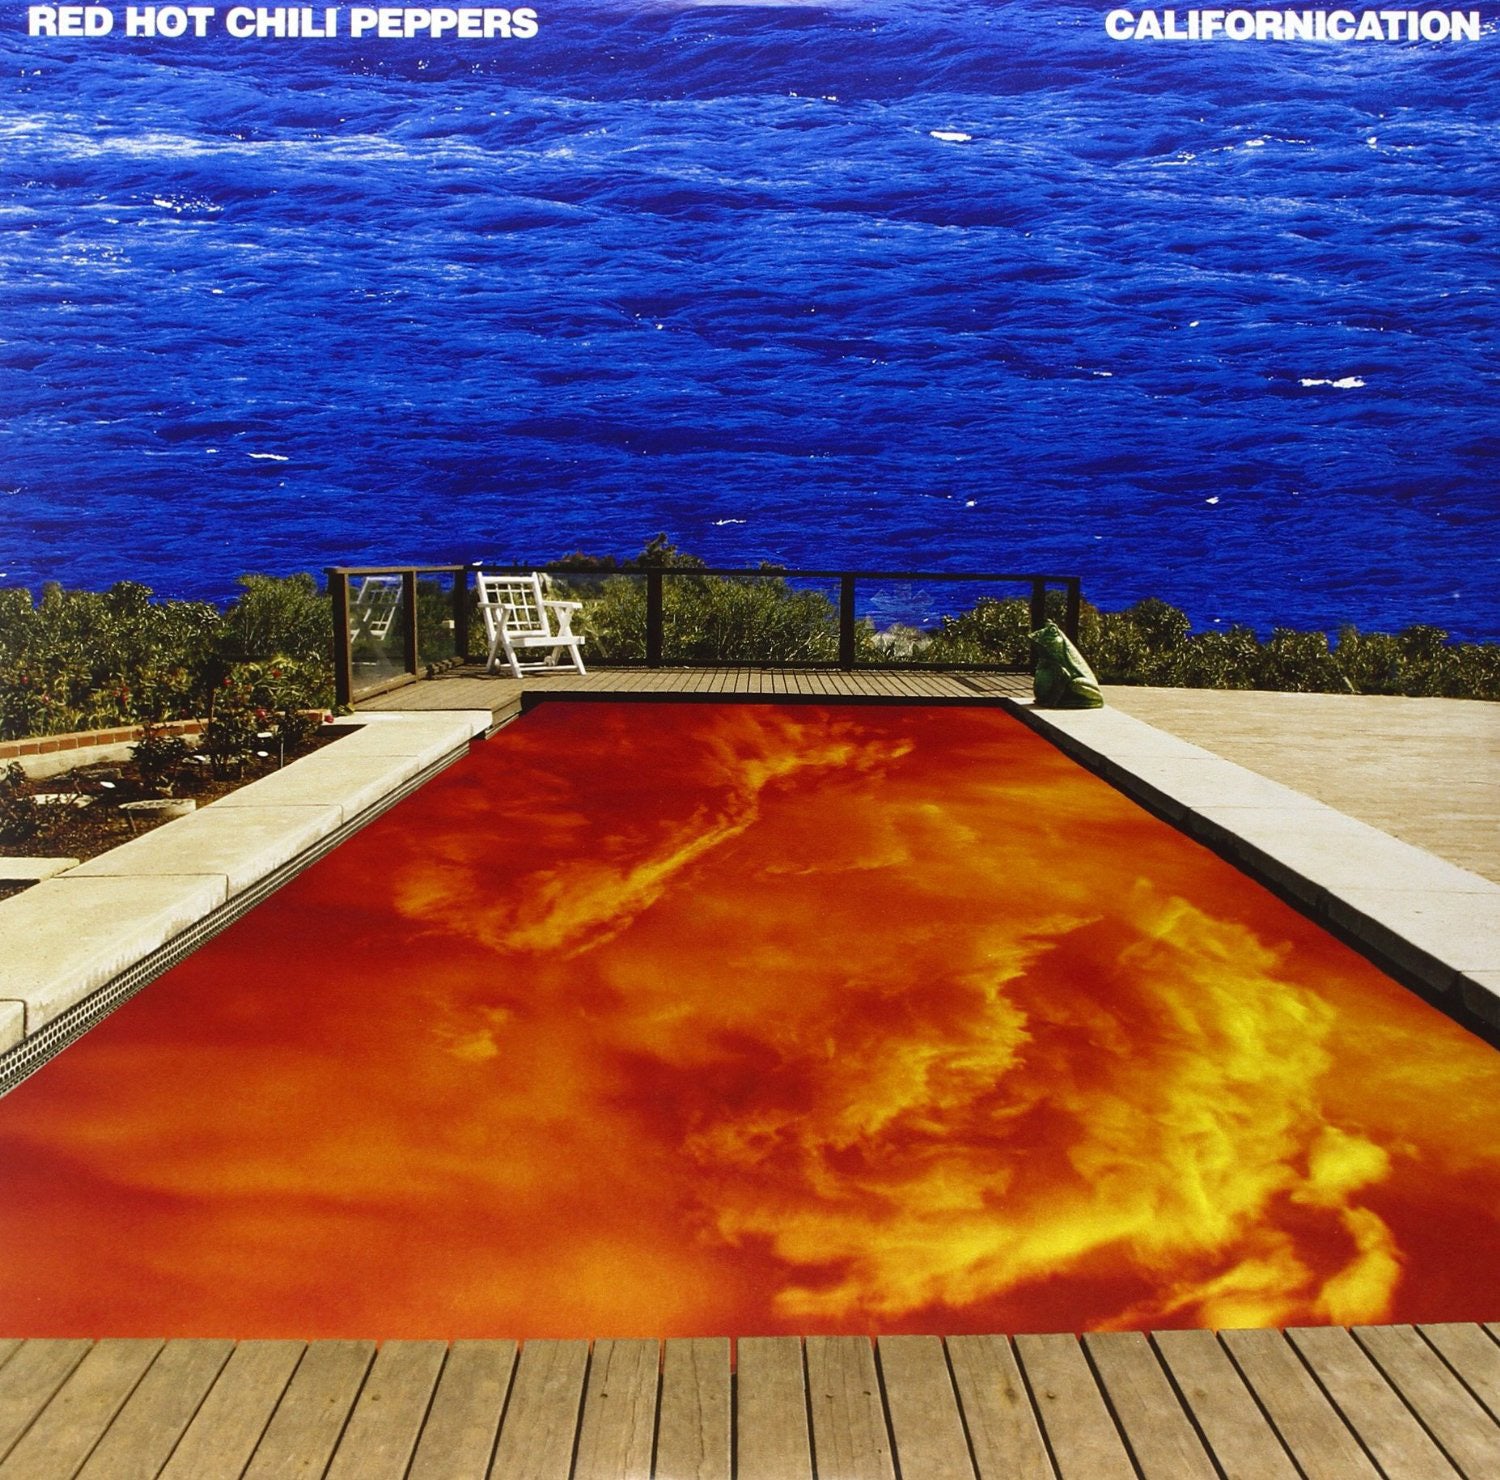 Red Hot Chili Peppers - Californication (2LP)